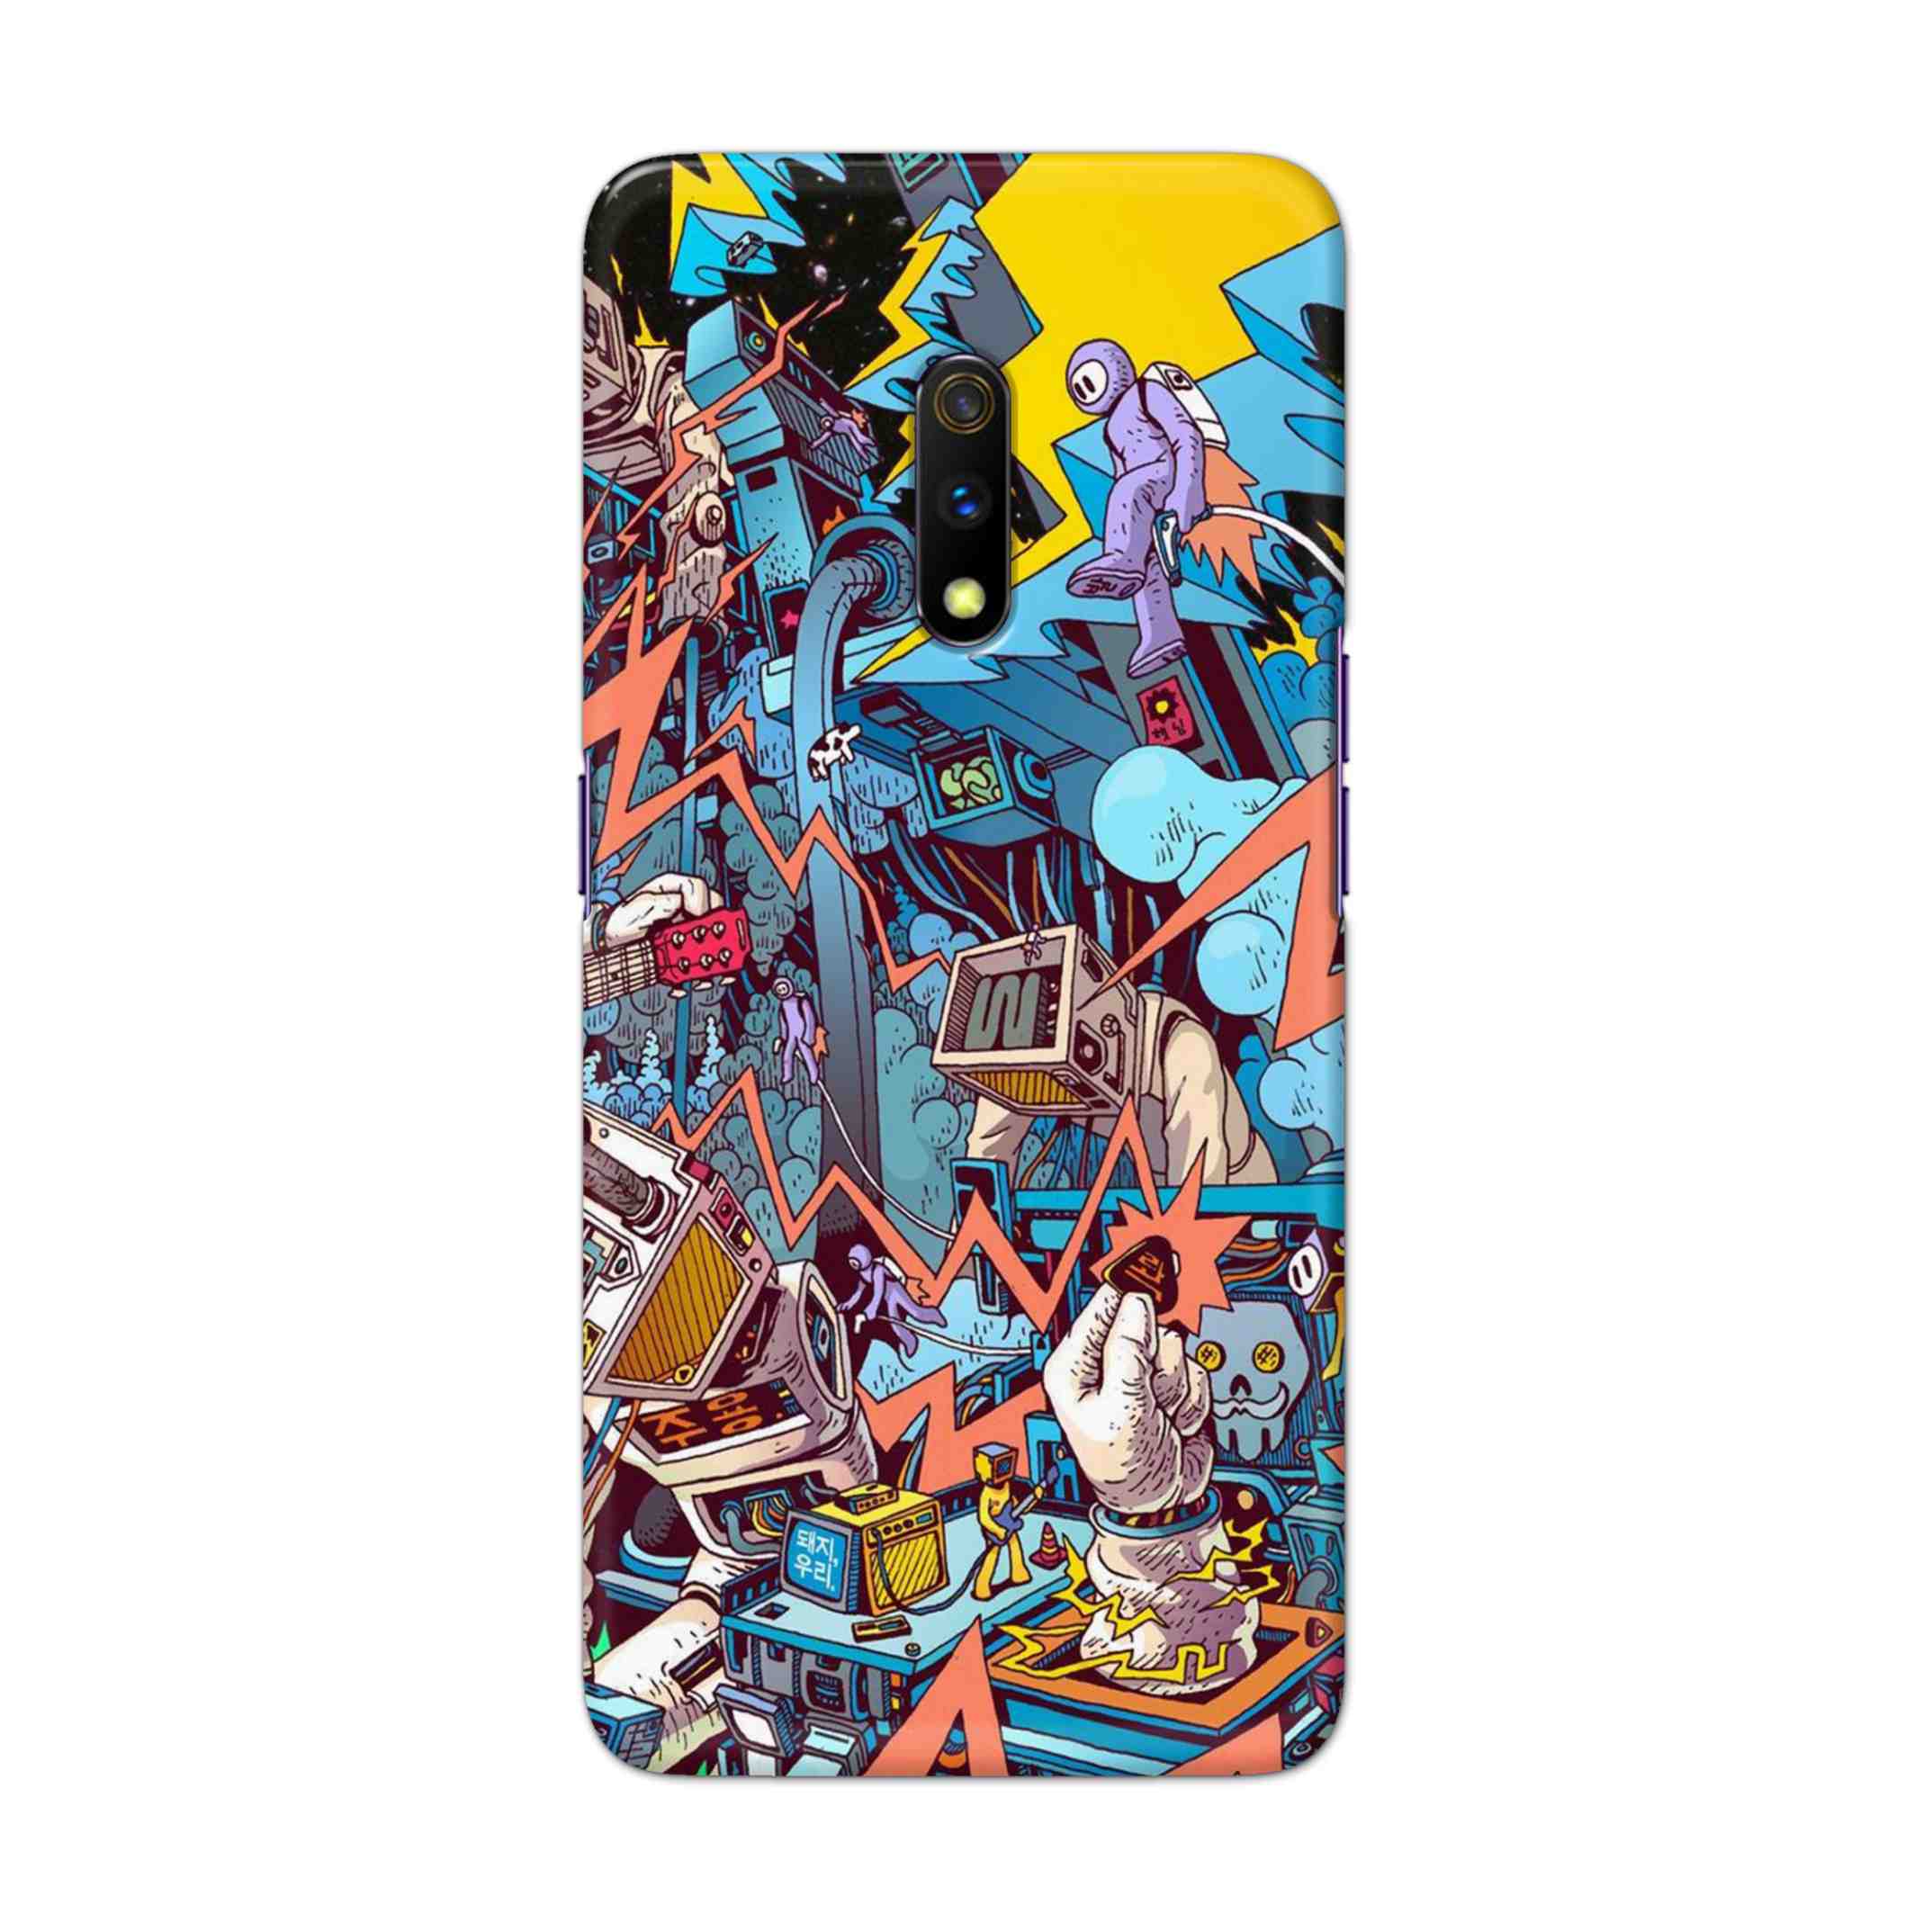 Buy Ofo Panic Hard Back Mobile Phone Case Cover For Oppo Realme X Online